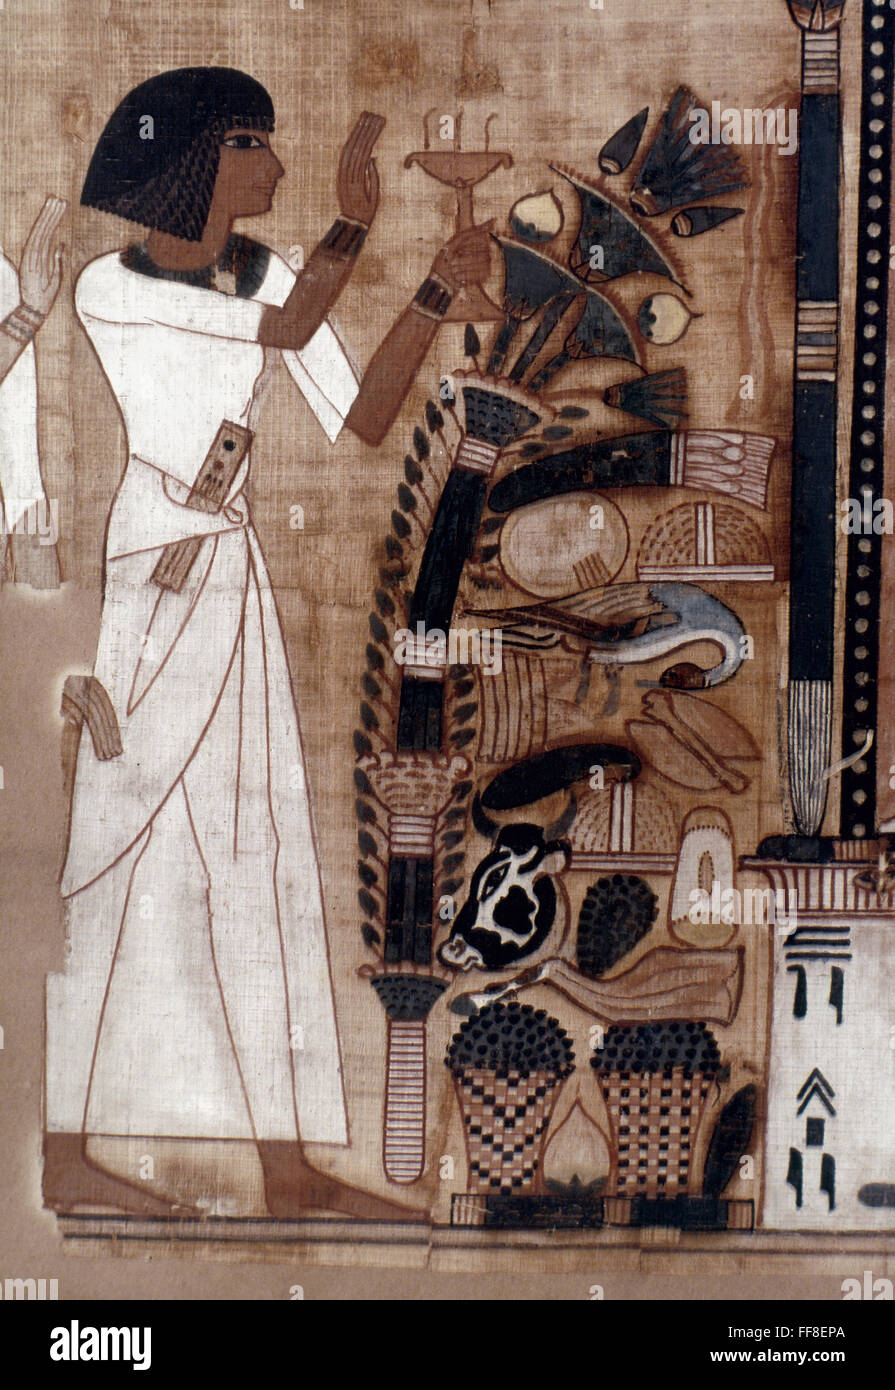 EGYPTIAN FUNERAL PAPYRUS. /nThe deceased Neb-Qued before a table of offerings. Funeral papyrus, 19th Dynasty. Stock Photo